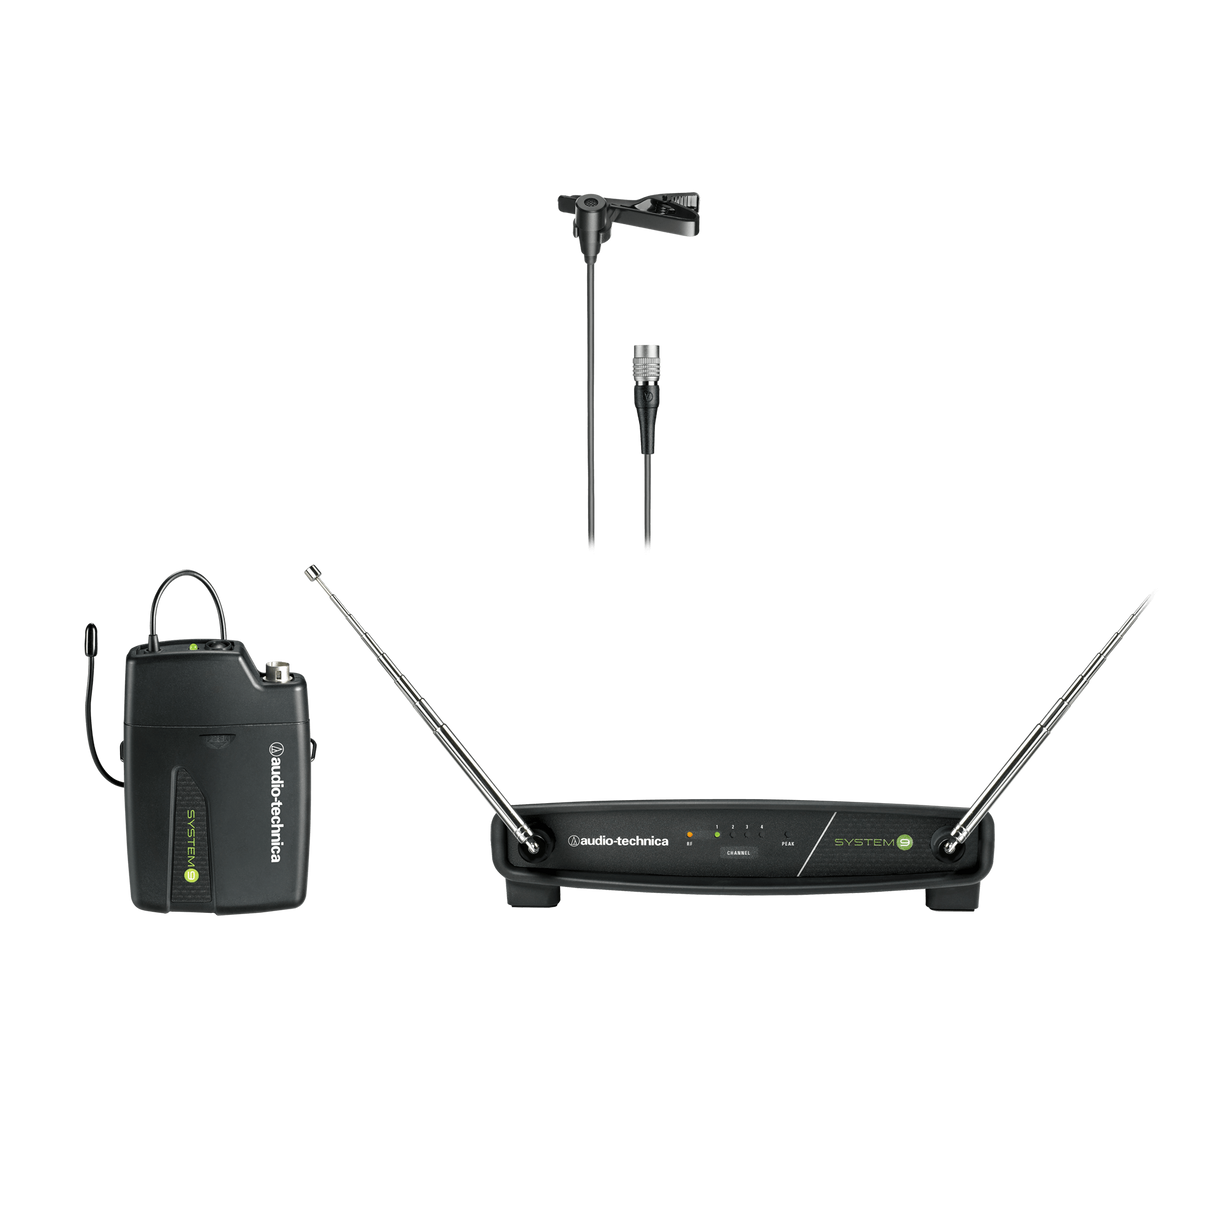 Audio Technica ATW-901A/L System 9 Wireless Lavalier Microphone System